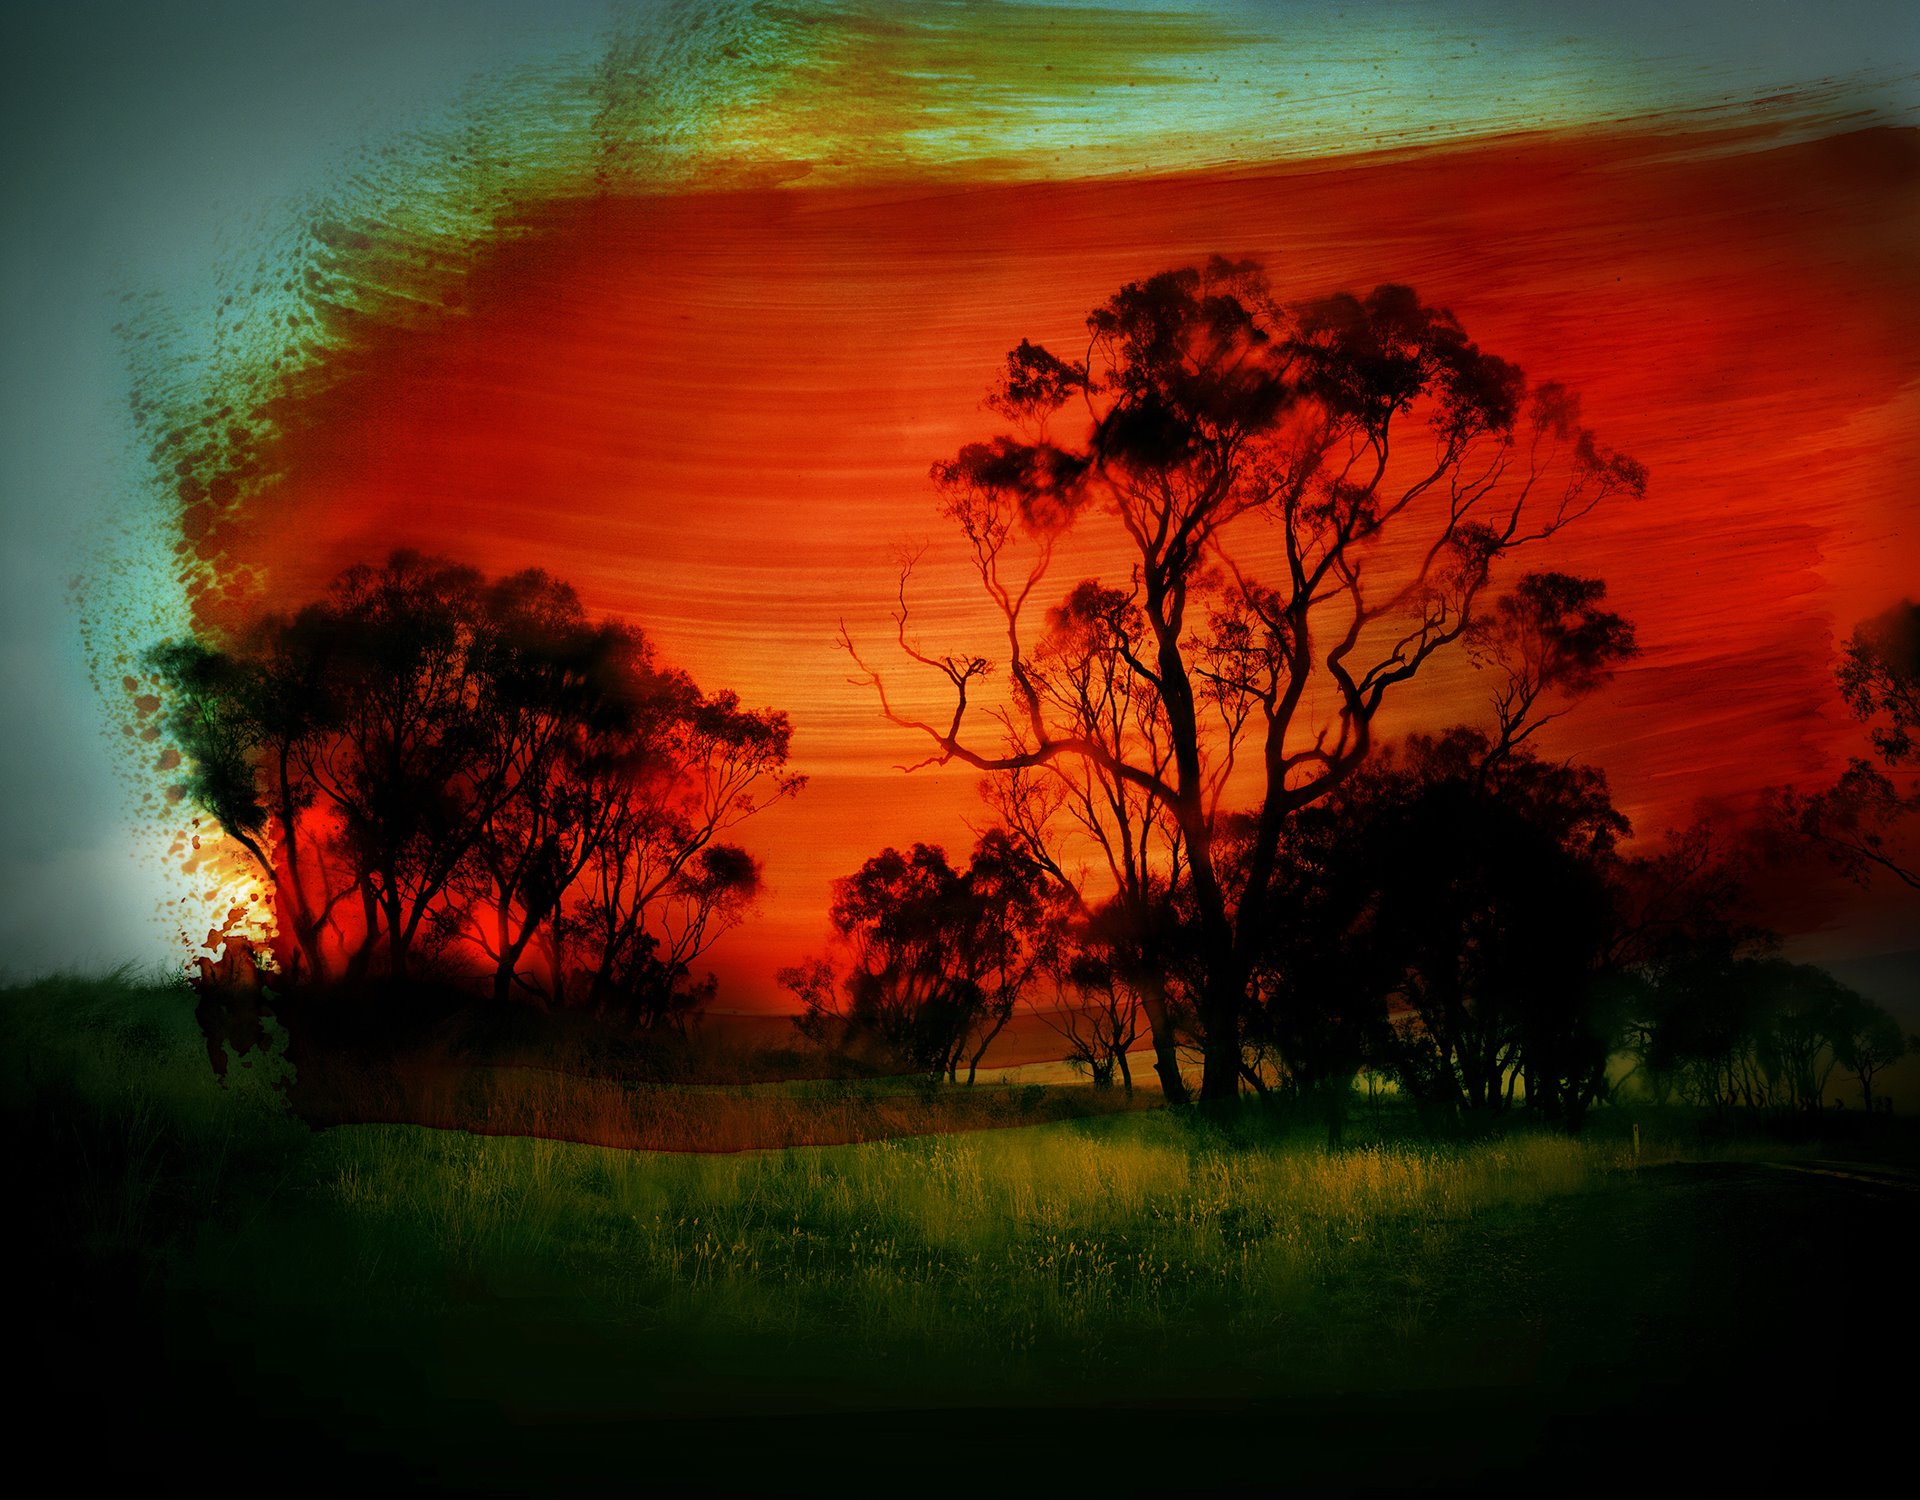 This image was taken near the artist&rsquo;s parent&rsquo;s home, in Callala Bay (Jerrinja and Wandi Wandian Country), Australia. This town was relatively unaffected by the 2019-2020 wildfires, but its residents were evacuated multiple times during that period and the threat of another wildfire remains constant. The photograph was overlaid with inks and reworked by the photographer.